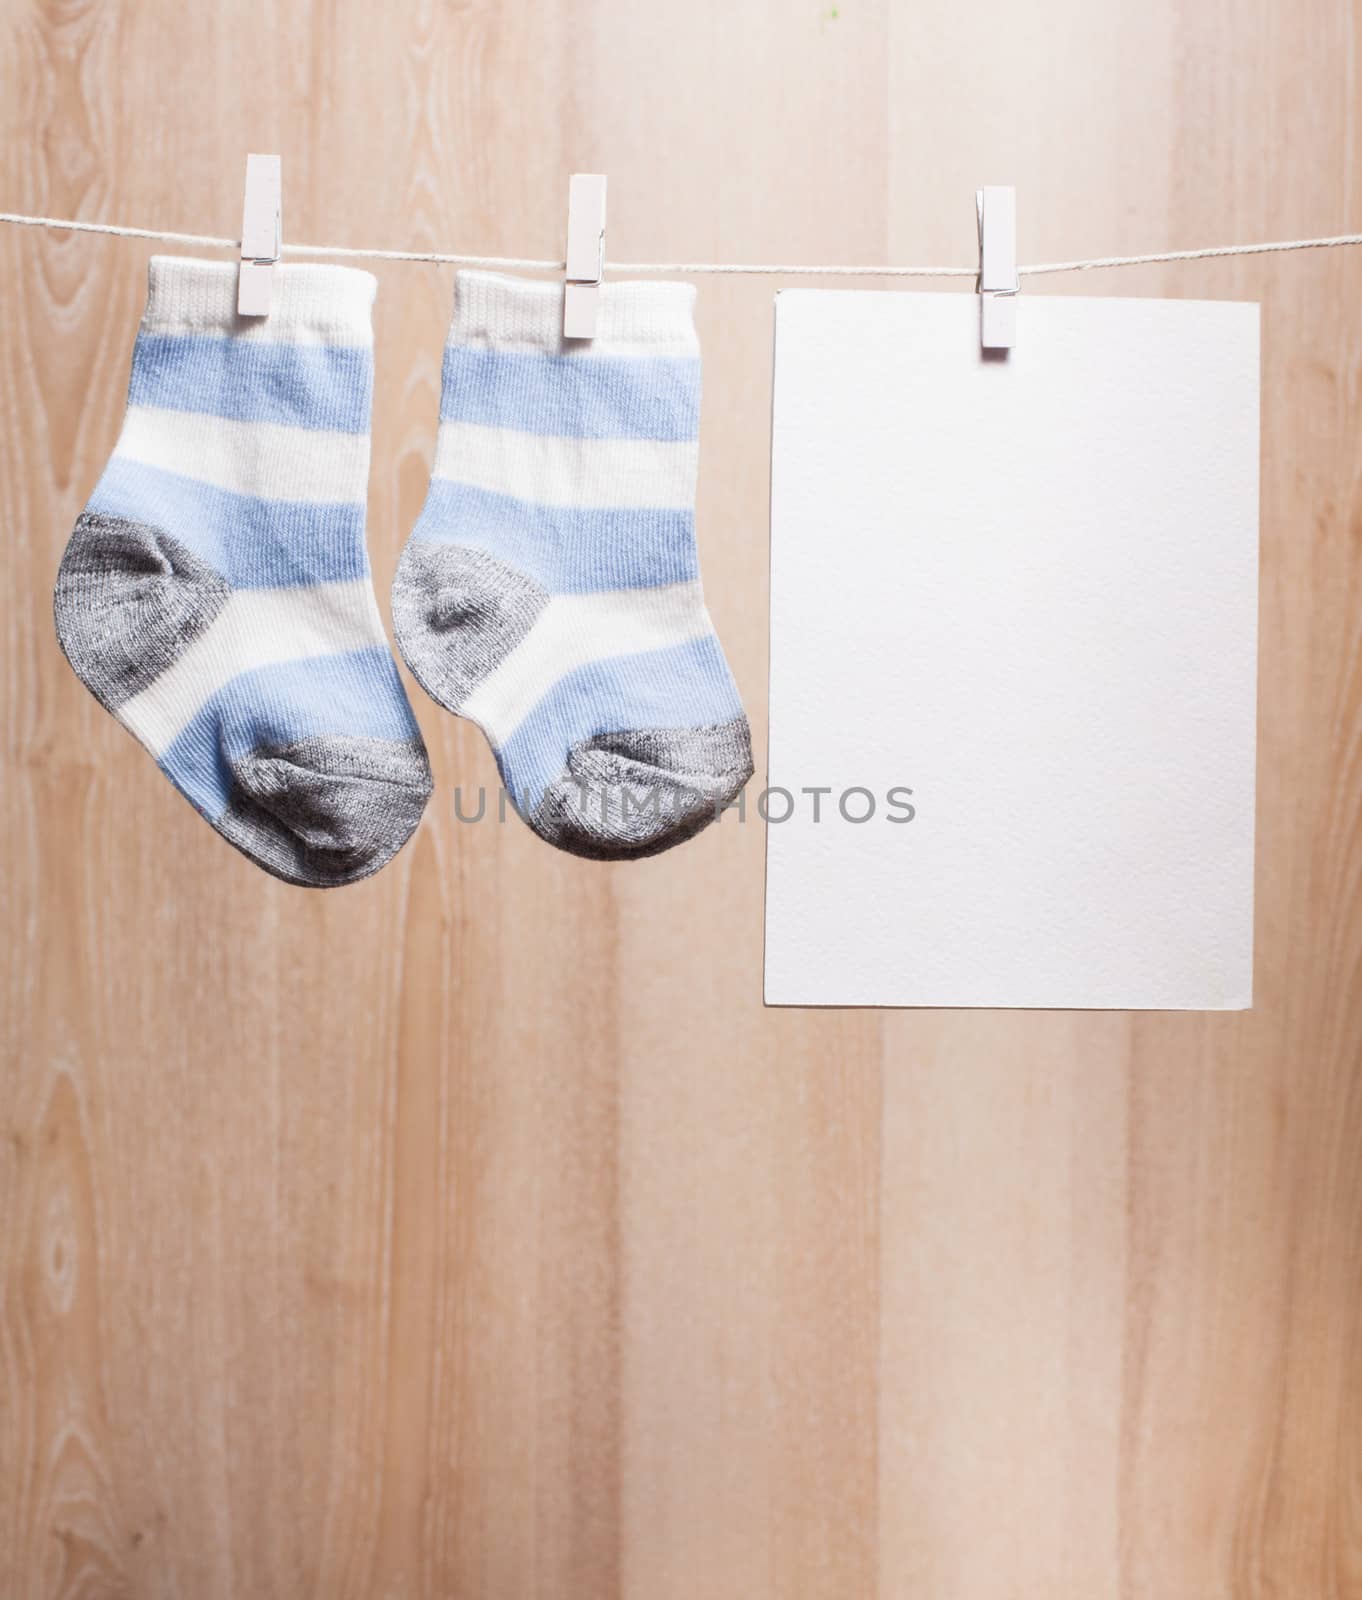 Baby boy socks attached to the rope and blank card for greetings